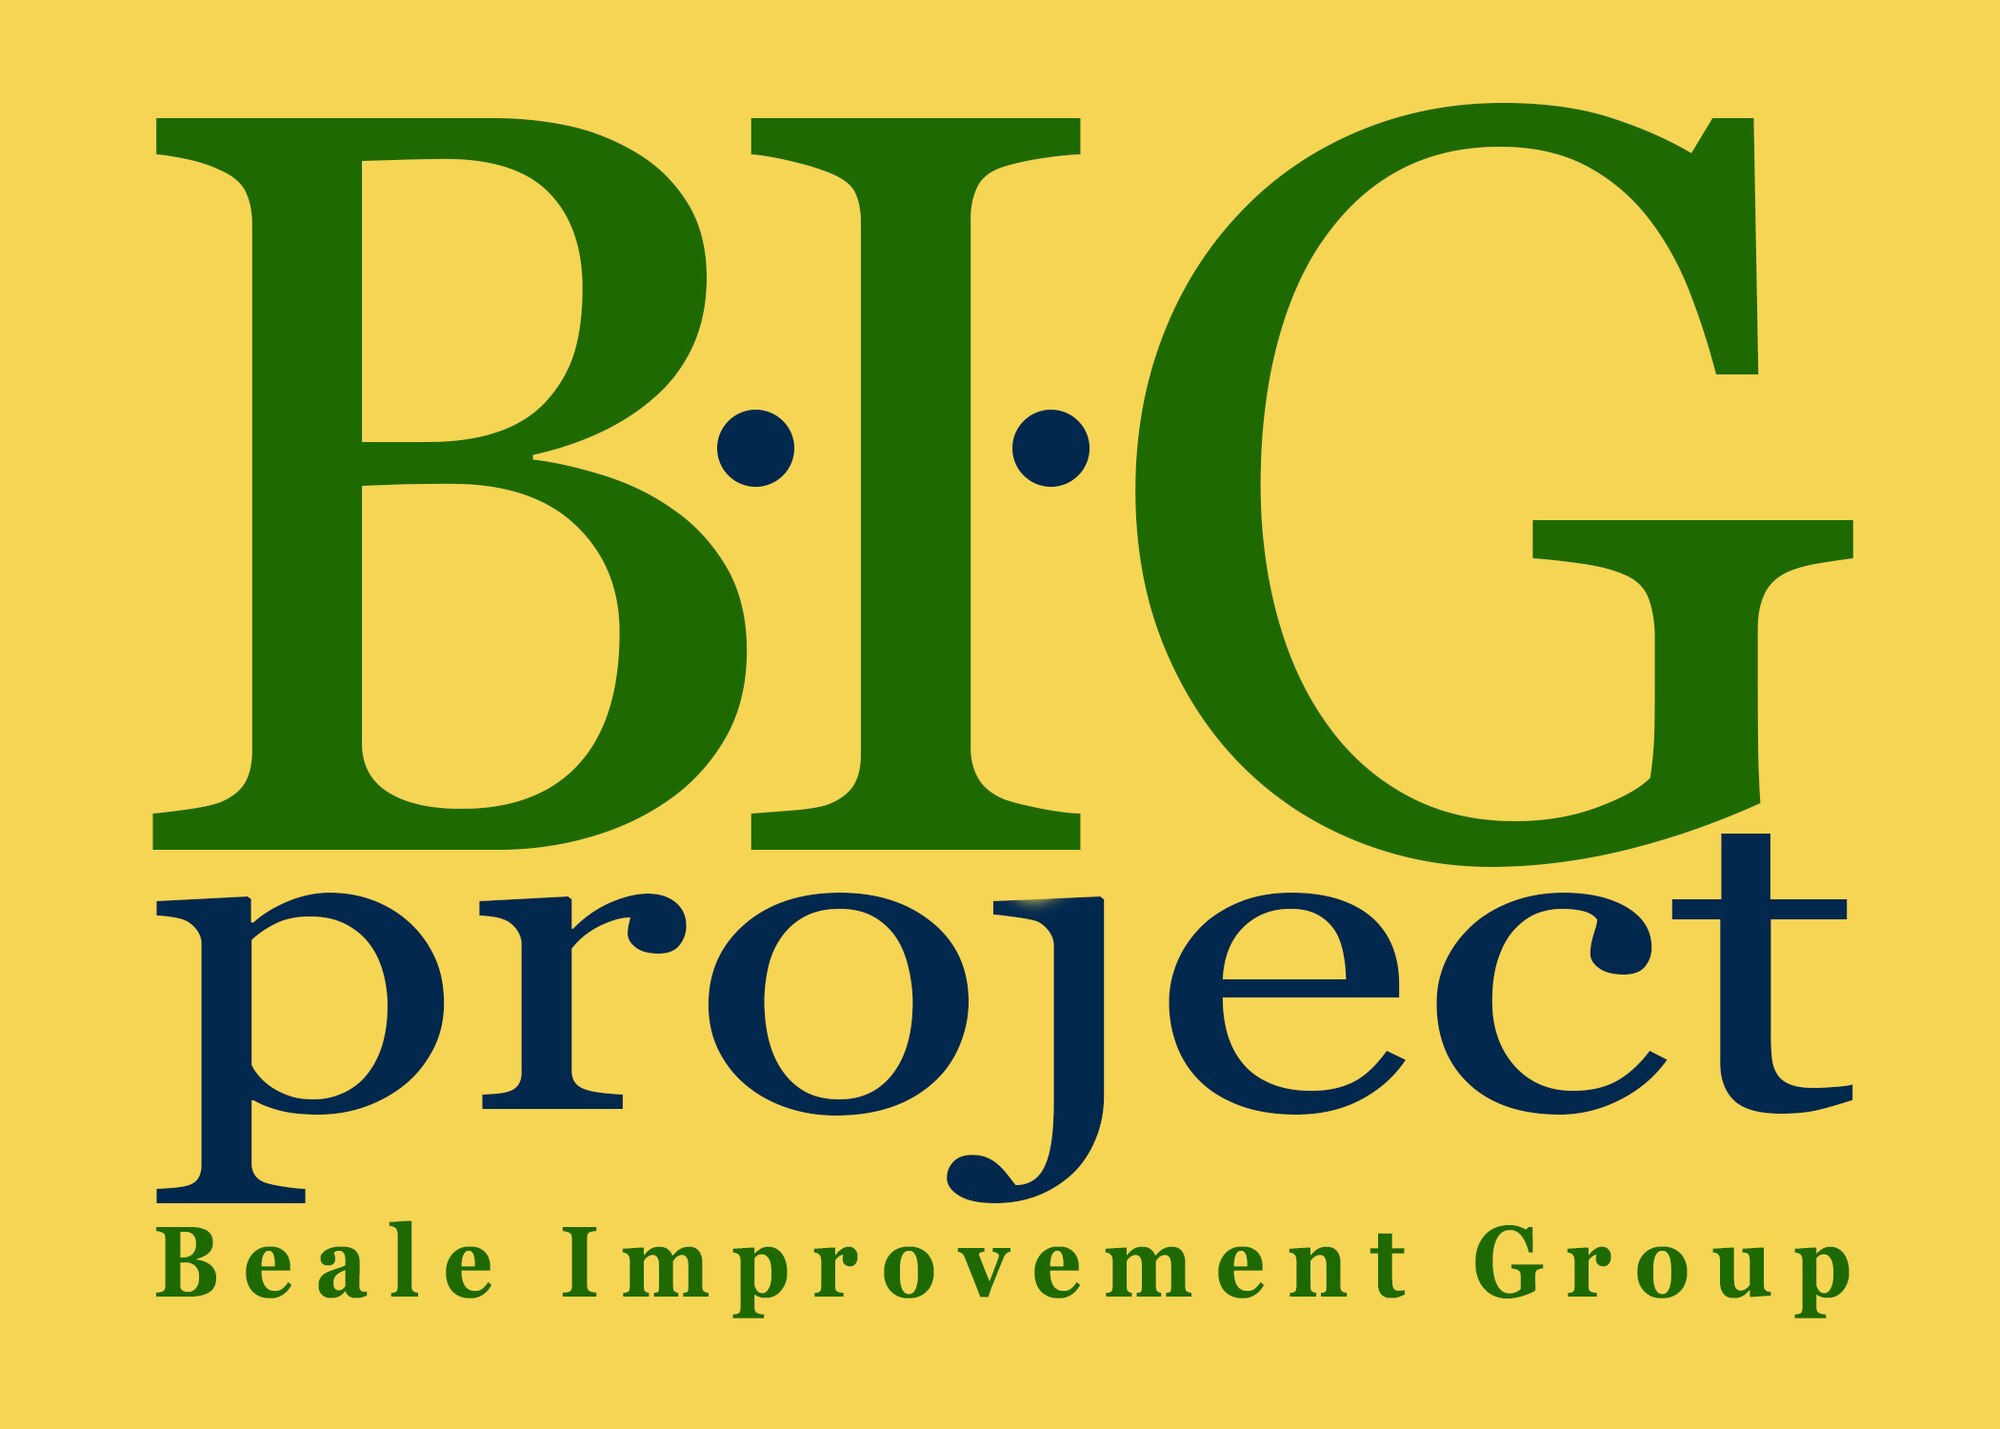 The “B.I.G Project” or Beale improvement Group is a new share-point based discussion board that will allow members of Team Beale to post and respond to questions, concerns and process improvement ideas. The site is available to all individuals on base that have NIPR network access. (U.S. Air Force illustration by Staff Sgt. Jeffrey M. Schultze)